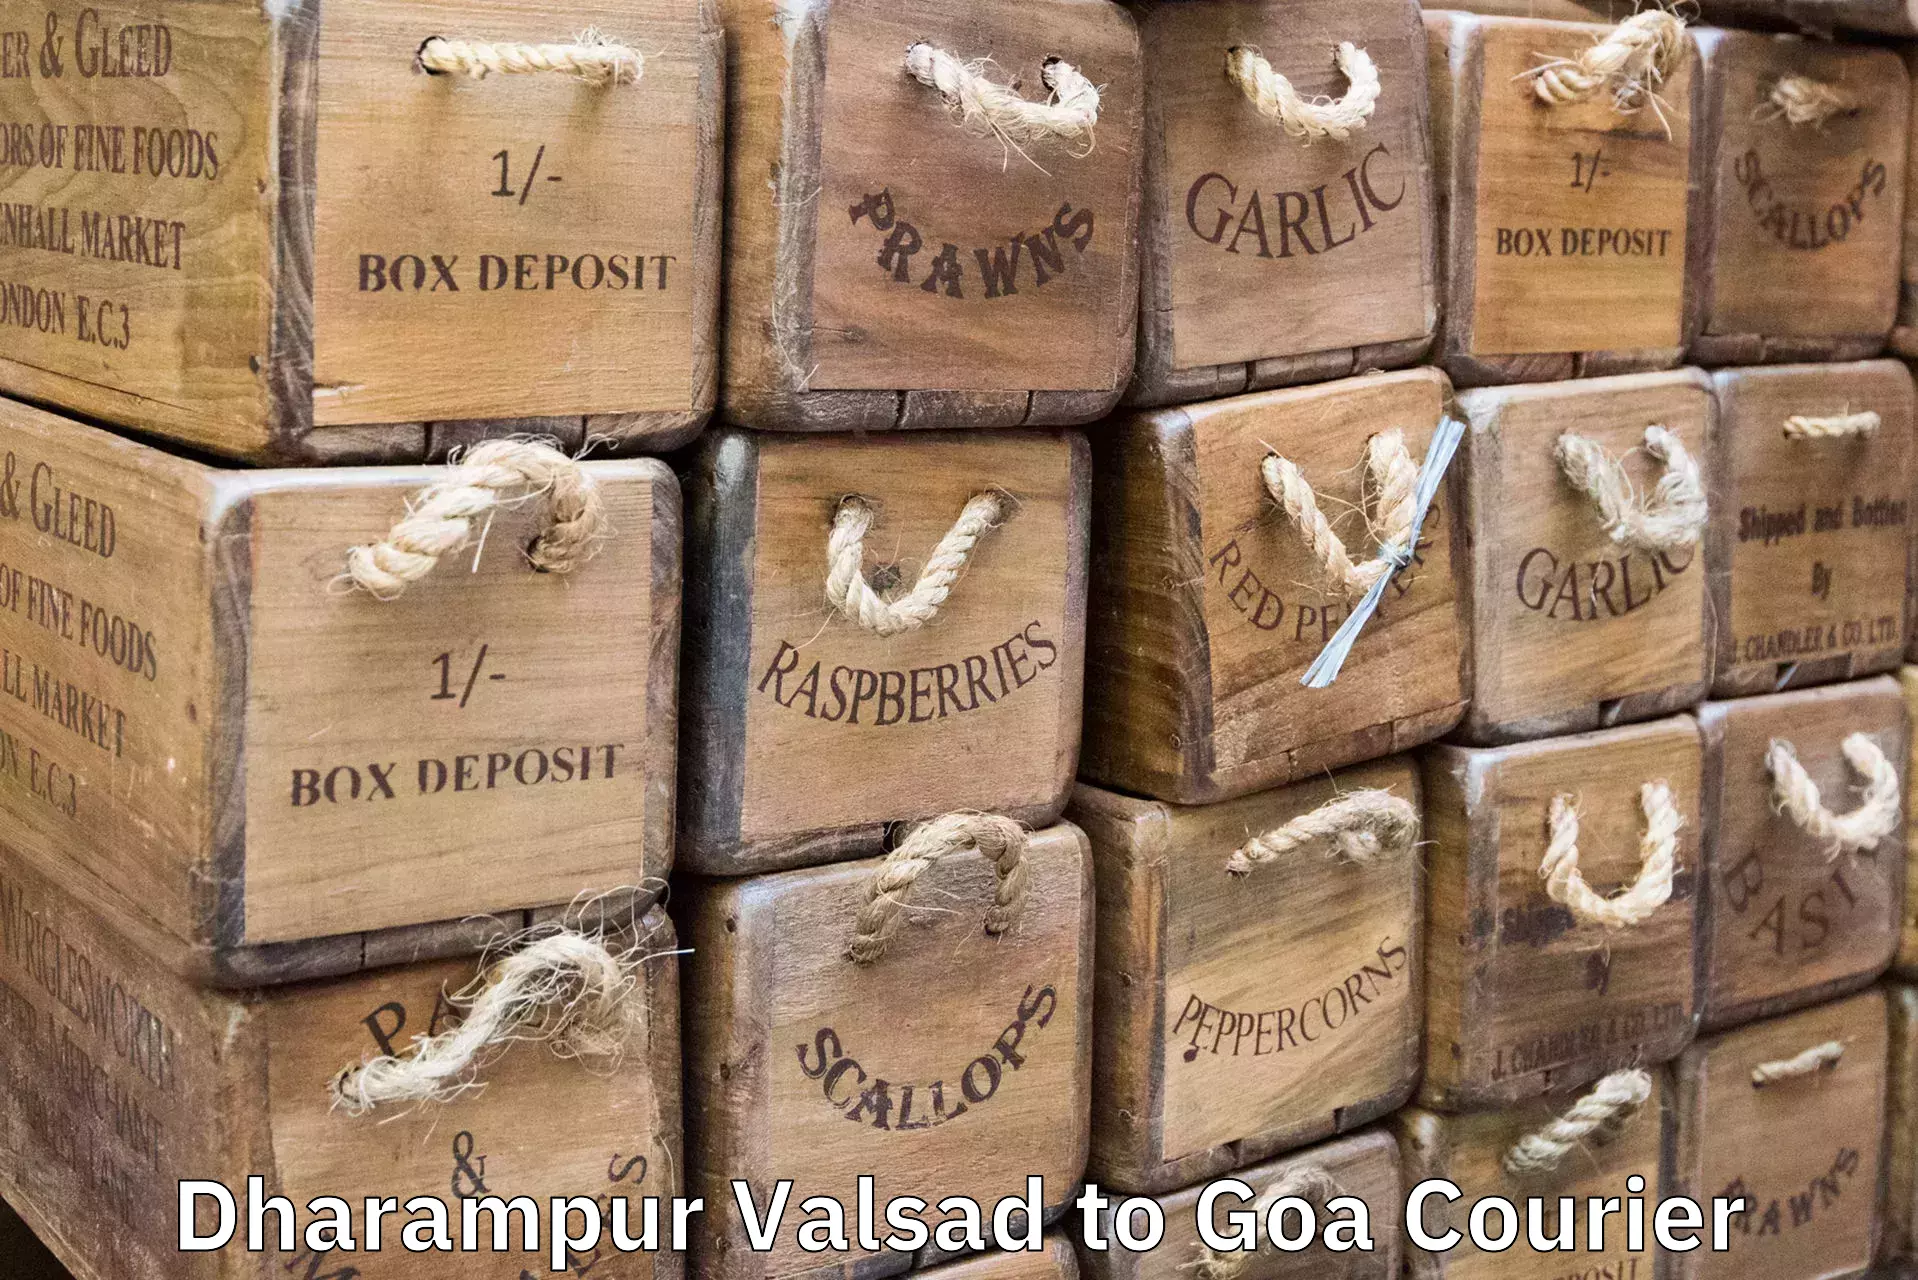 Baggage transport network Dharampur Valsad to South Goa